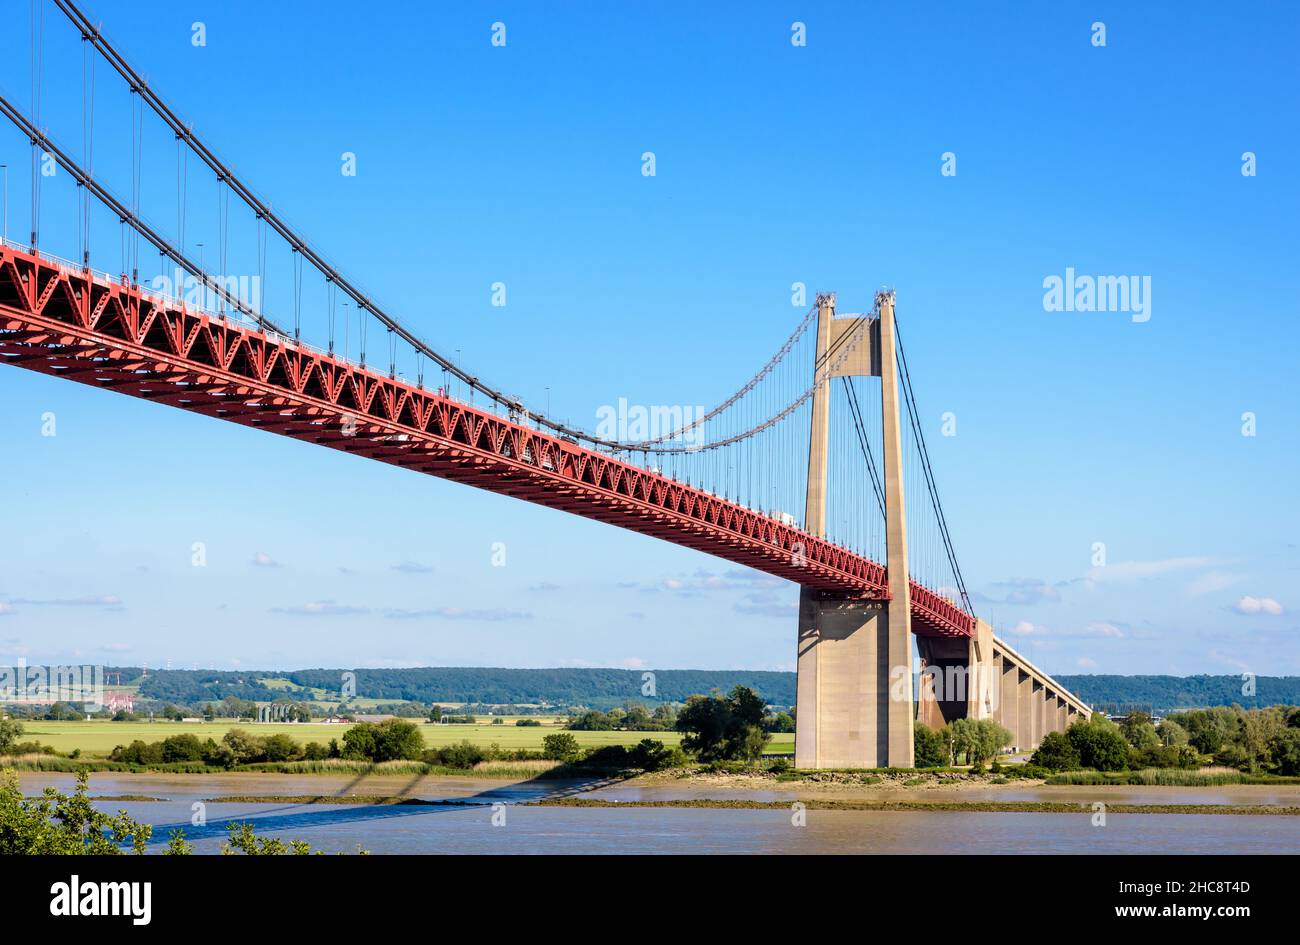 Southern pile of the Tancarville bridge, a suspension bridge over the Seine  river in the outskirts of Le Havre, France Stock Photo - Alamy